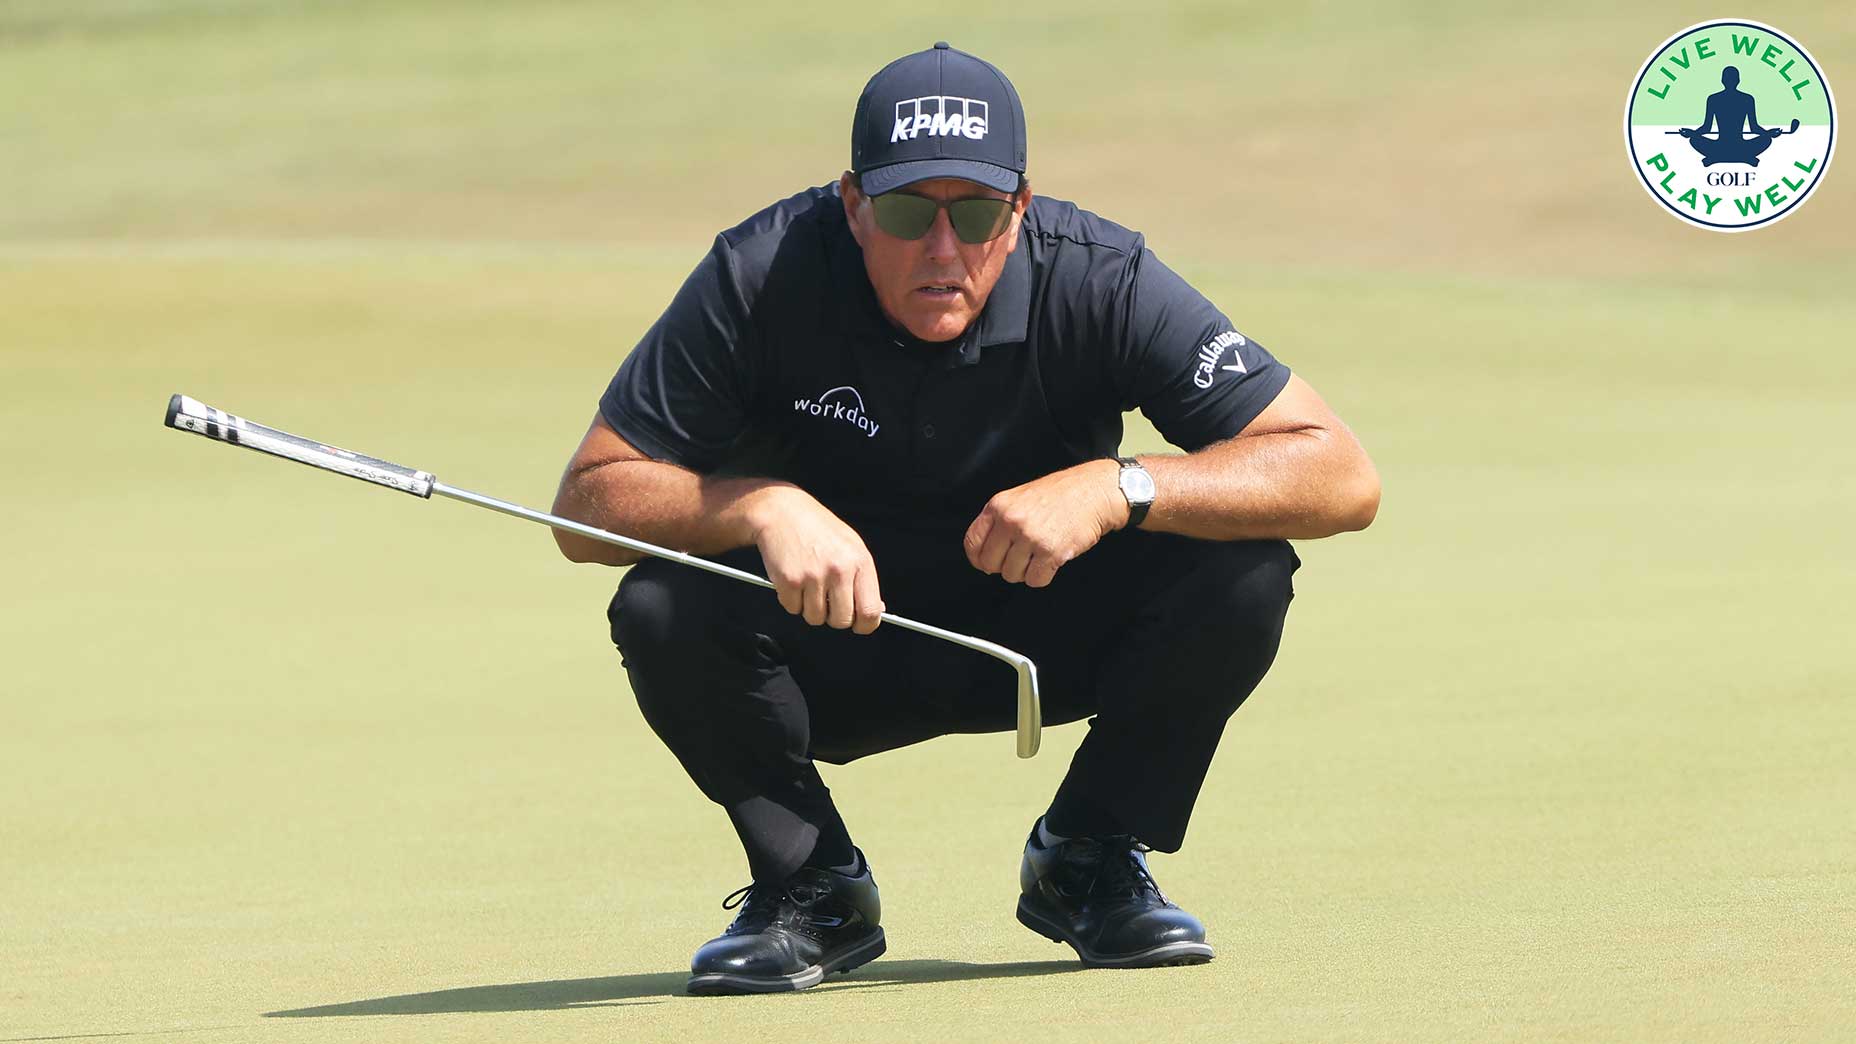 This Phil Mickelson meditation tactic helped him focus